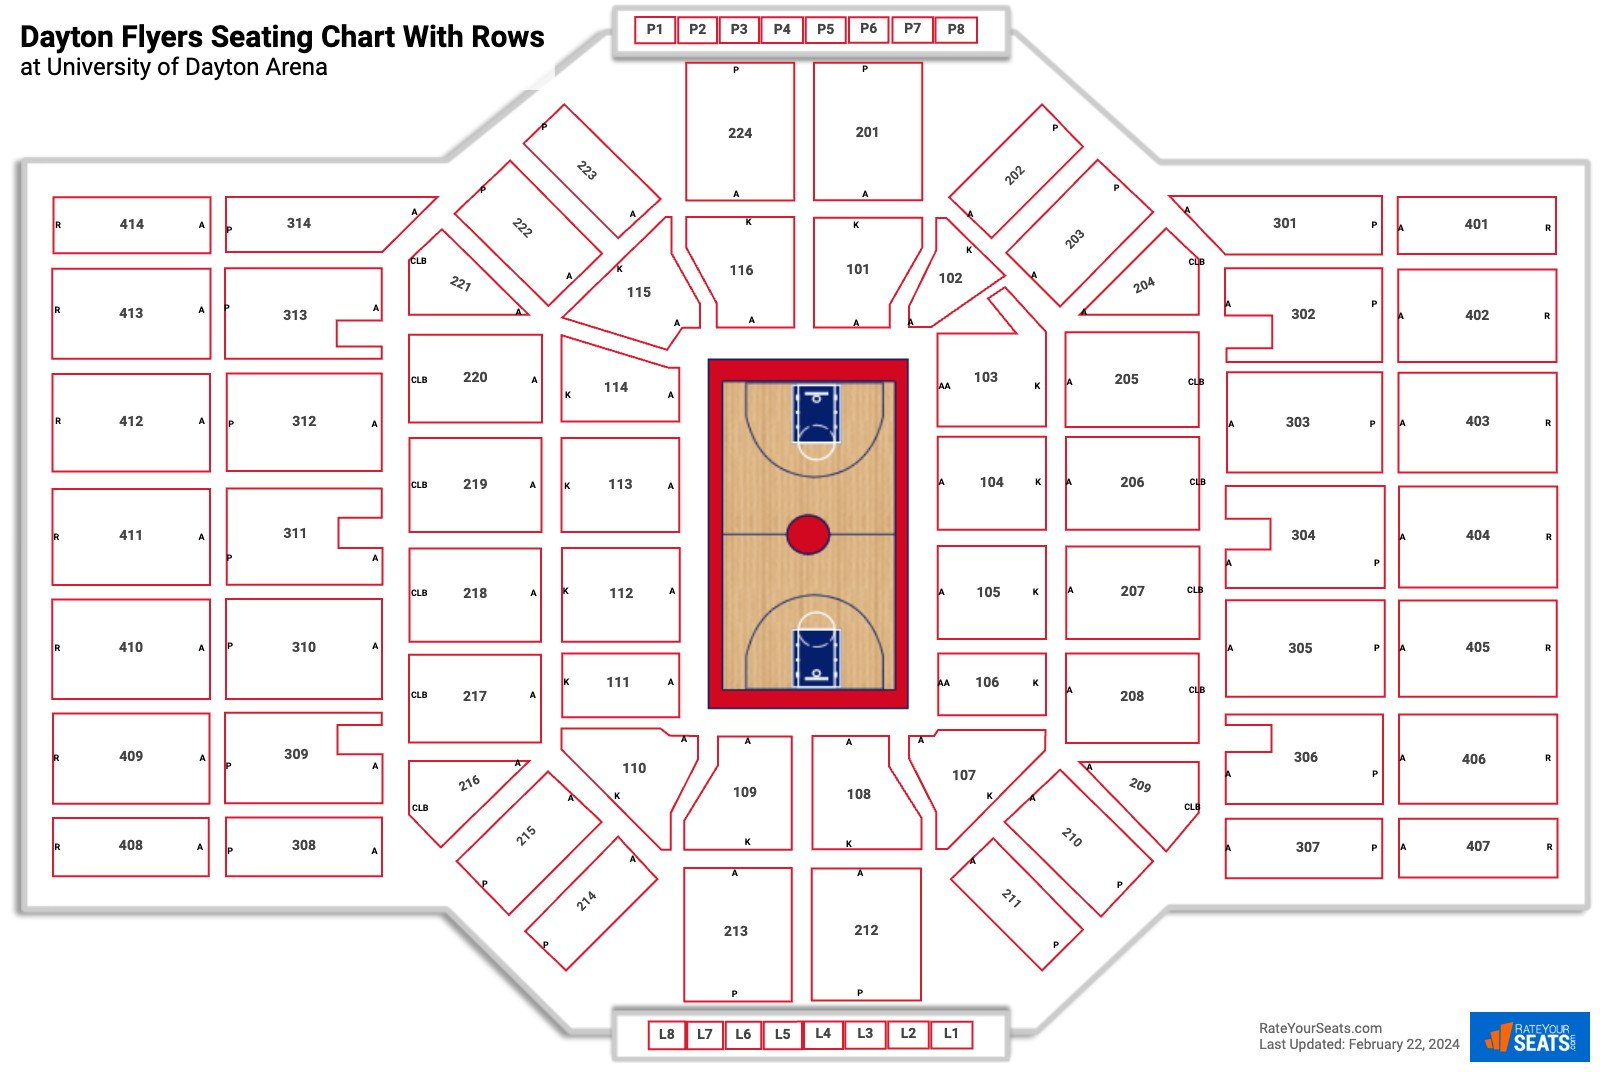 University of Dayton Arena seating chart with row numbers